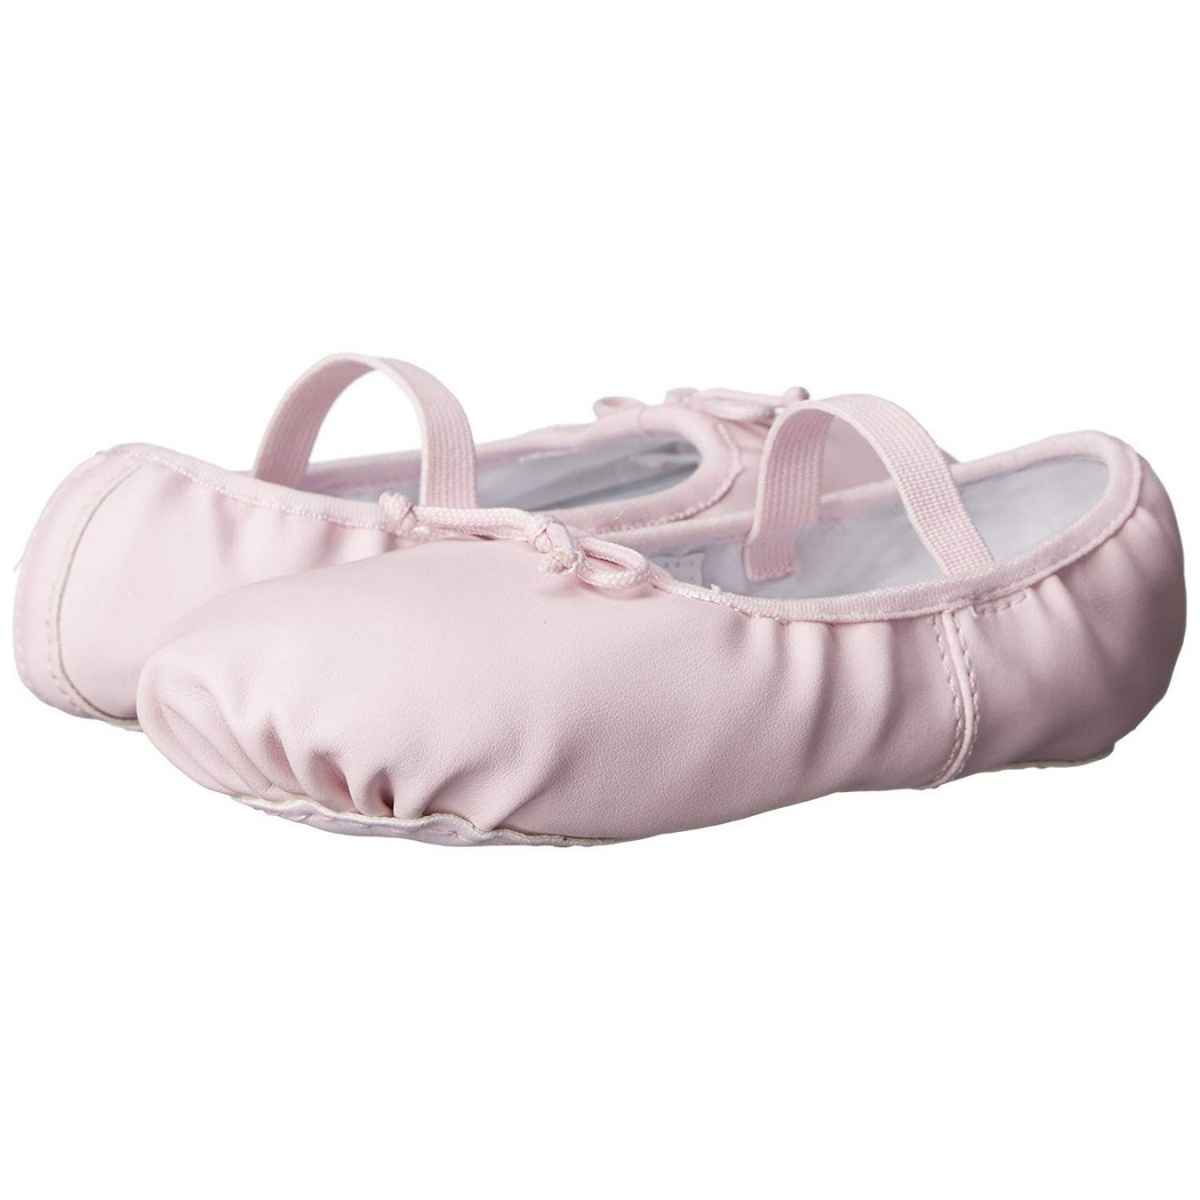 size 6/6.5 Brand new Pink Pointe Shoes 